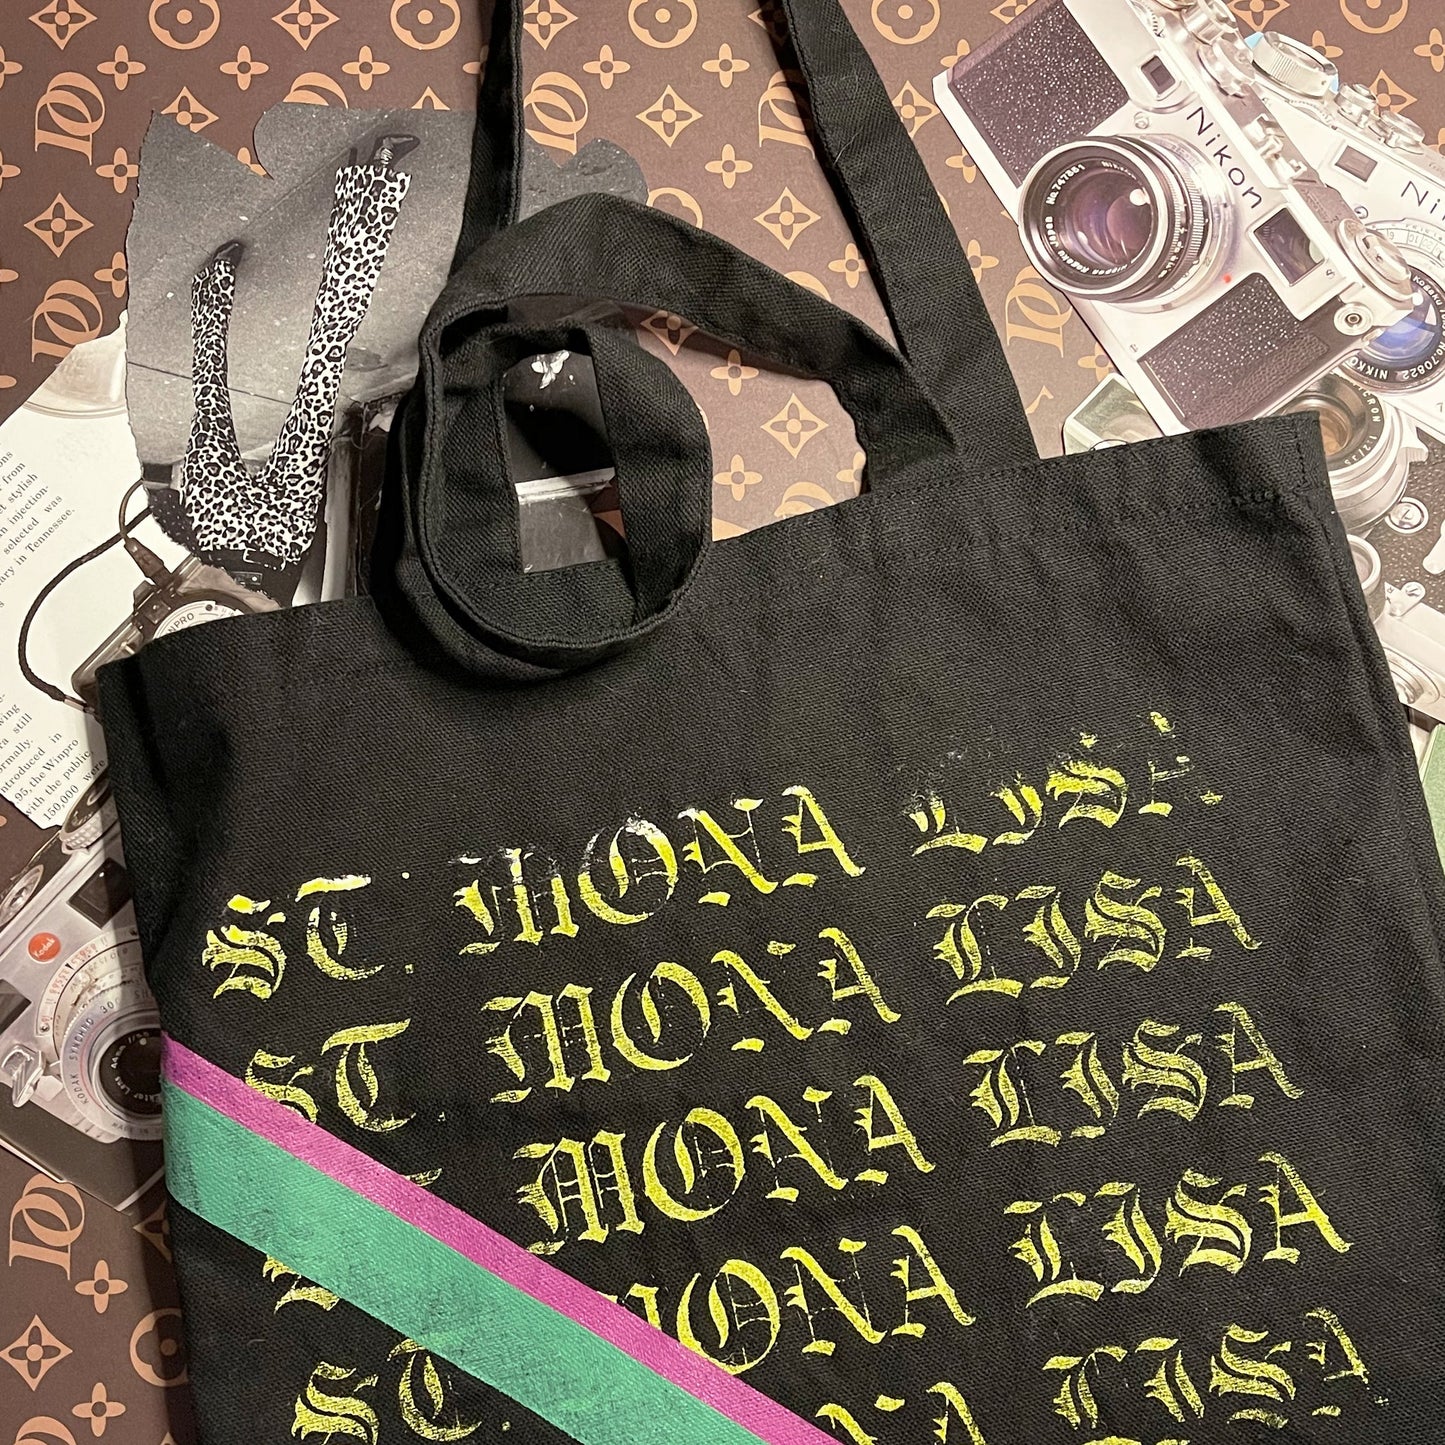 St Mona Lisa, Hand Painted Totes